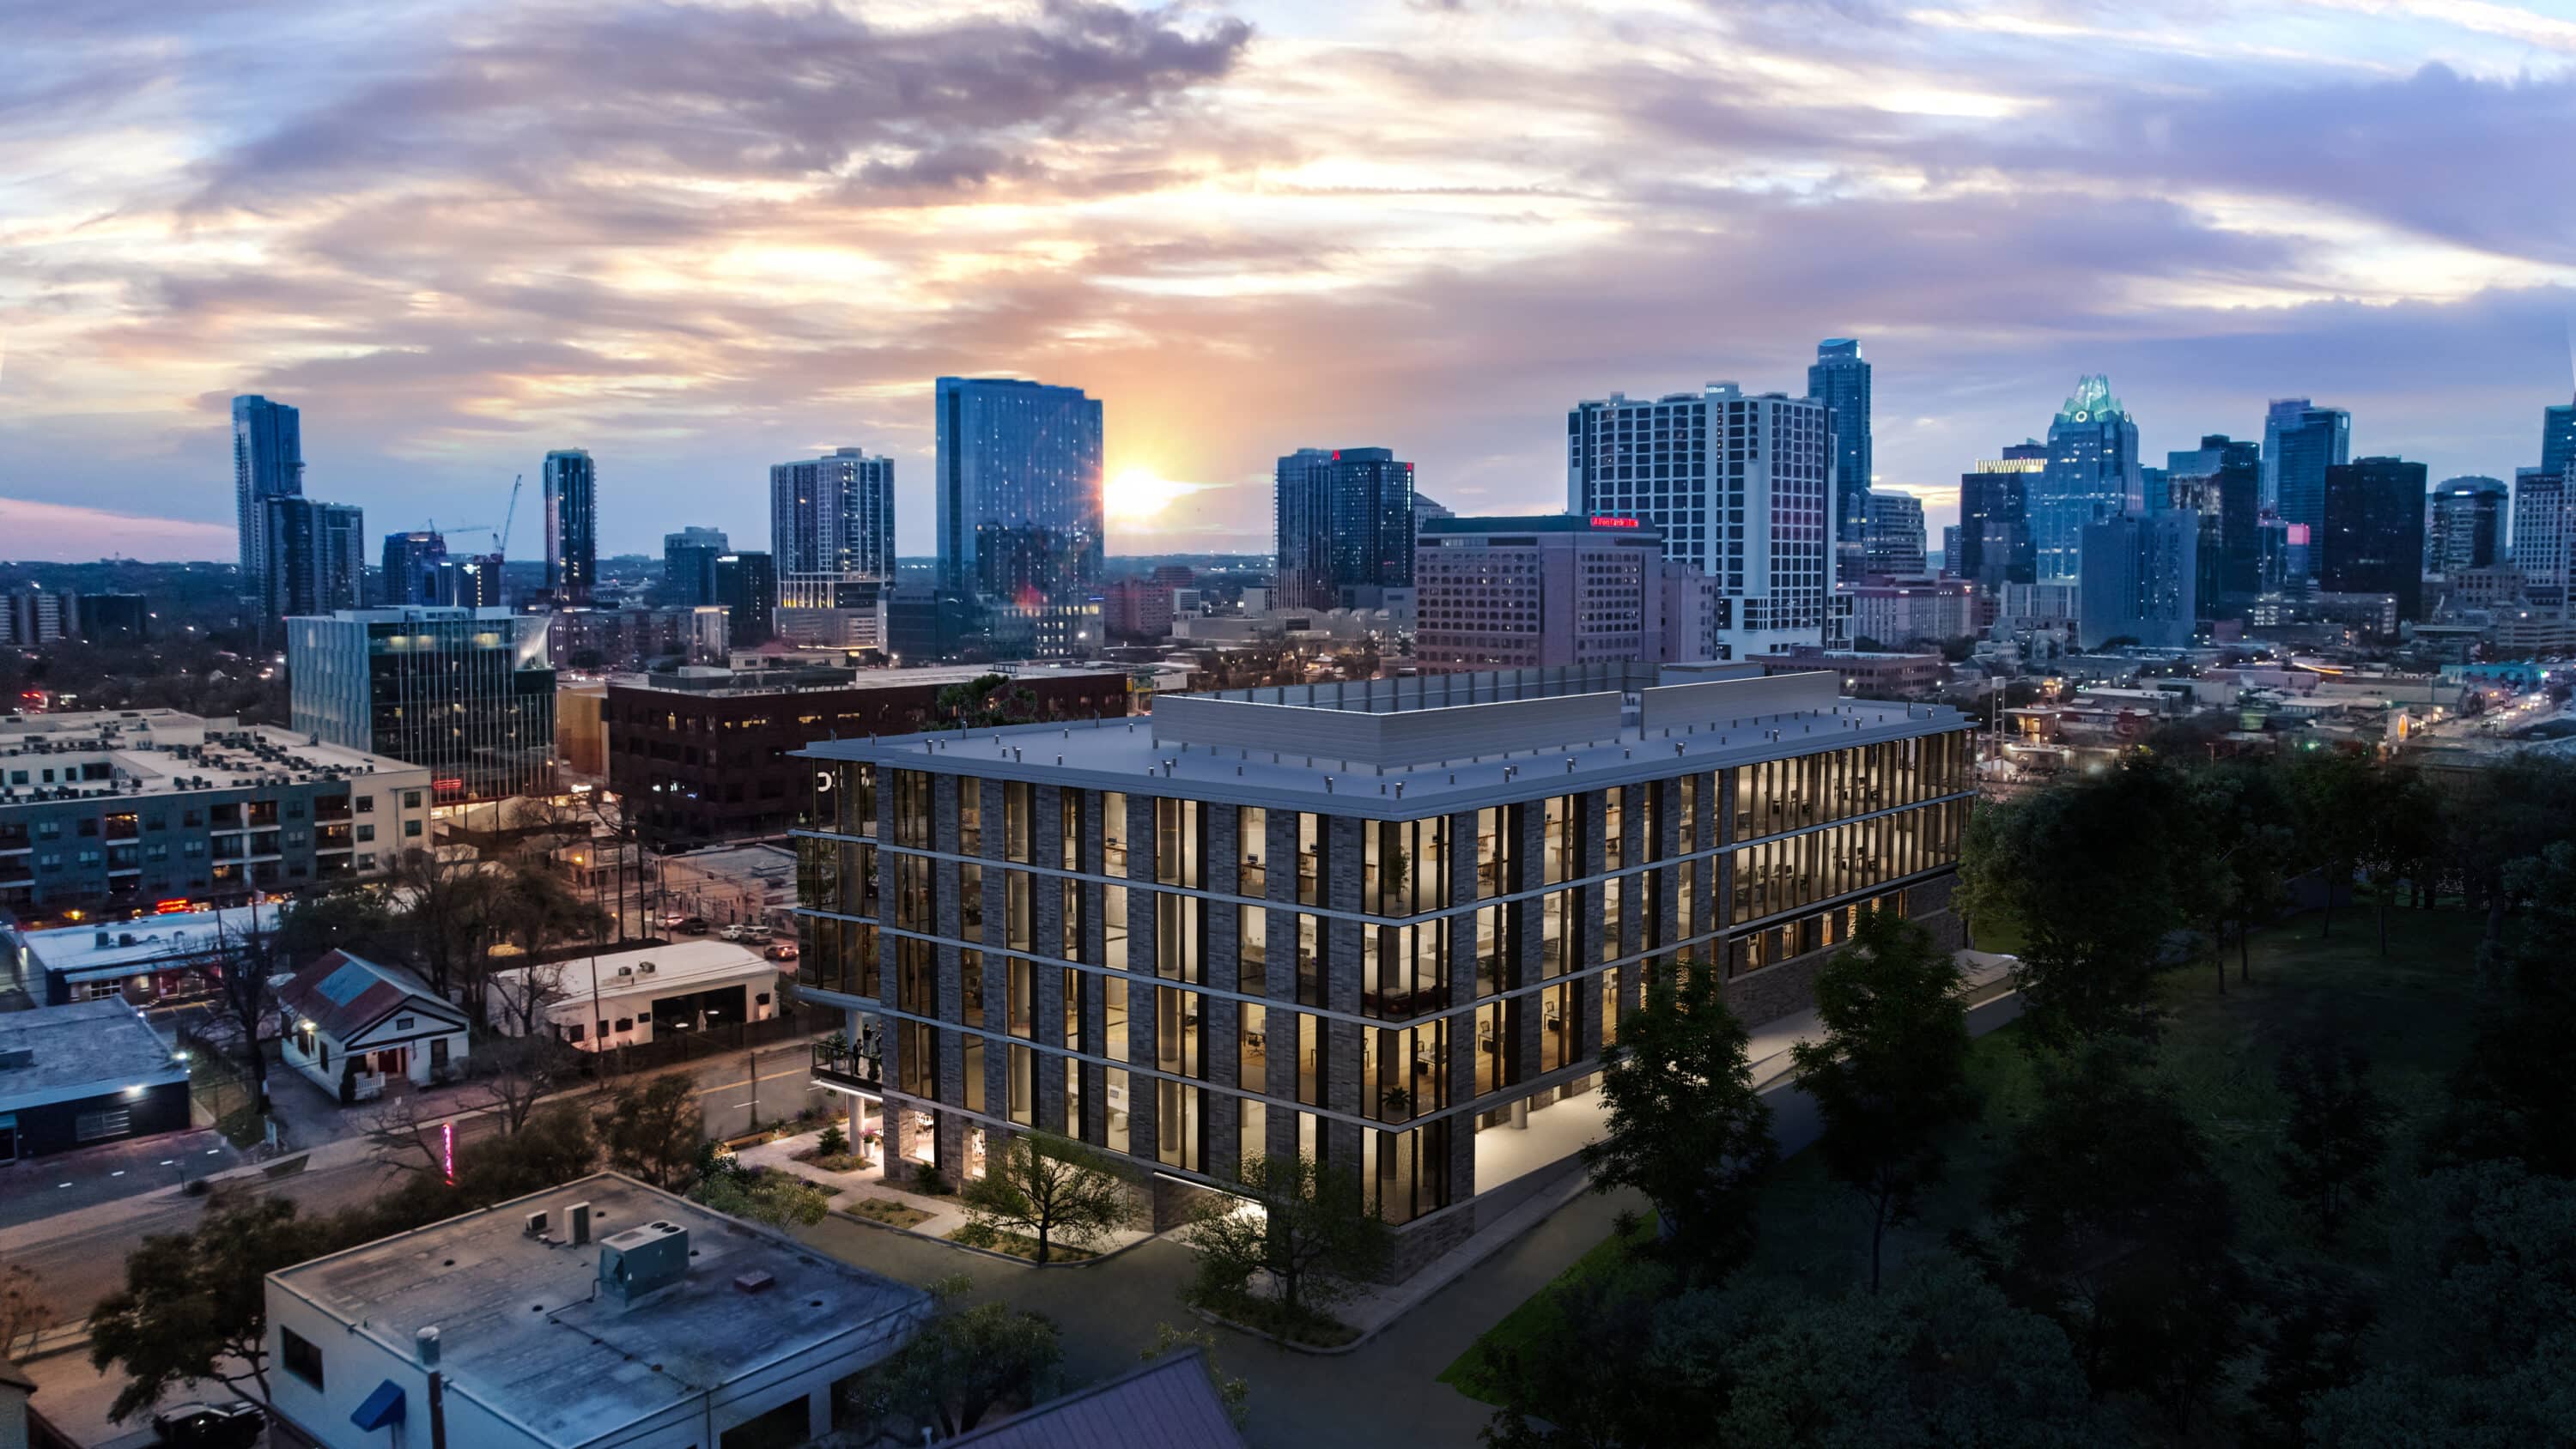 Alto | Office Buildings Delivering in East Austin